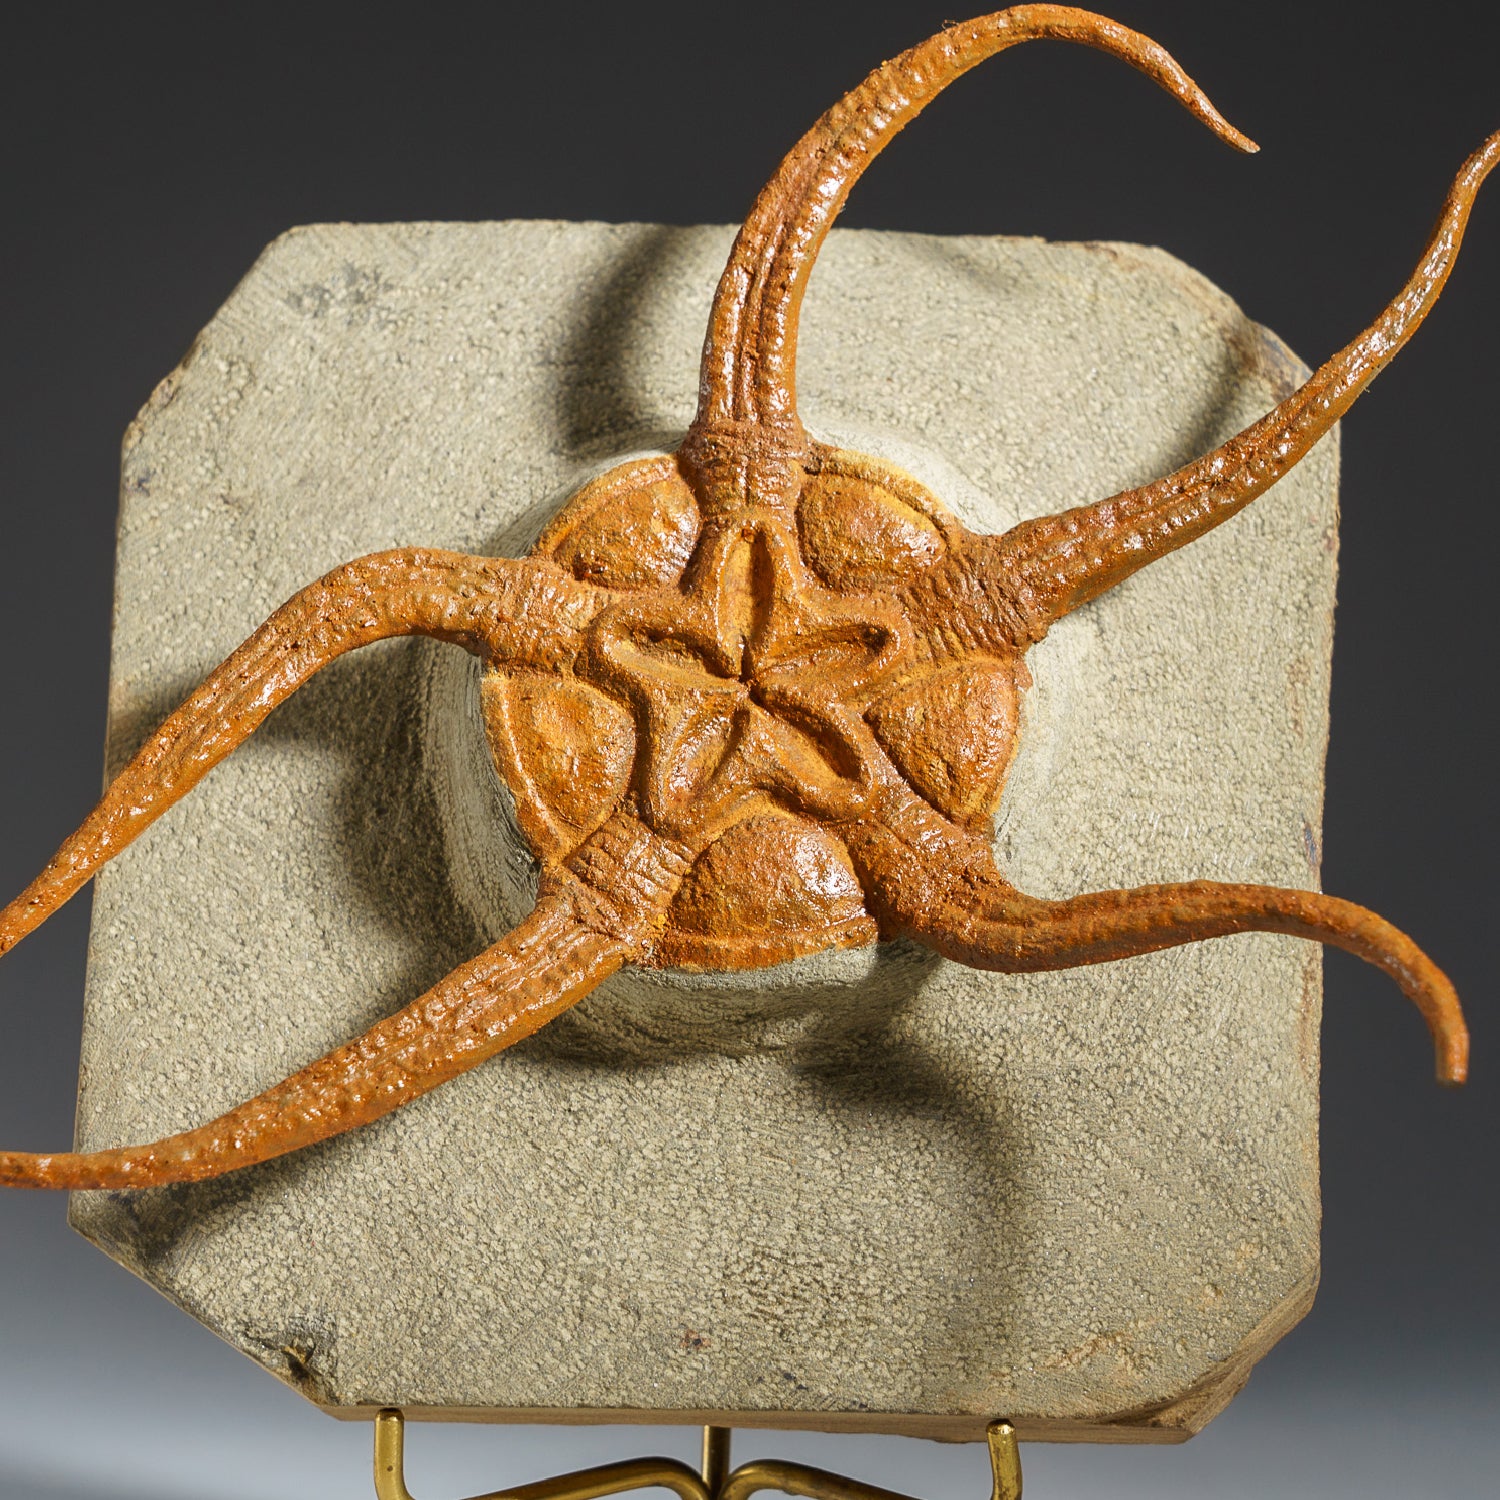 Genuine Ophiuroidea Brittle Star Fossil with Customized Display Stand (1.8 lbs)